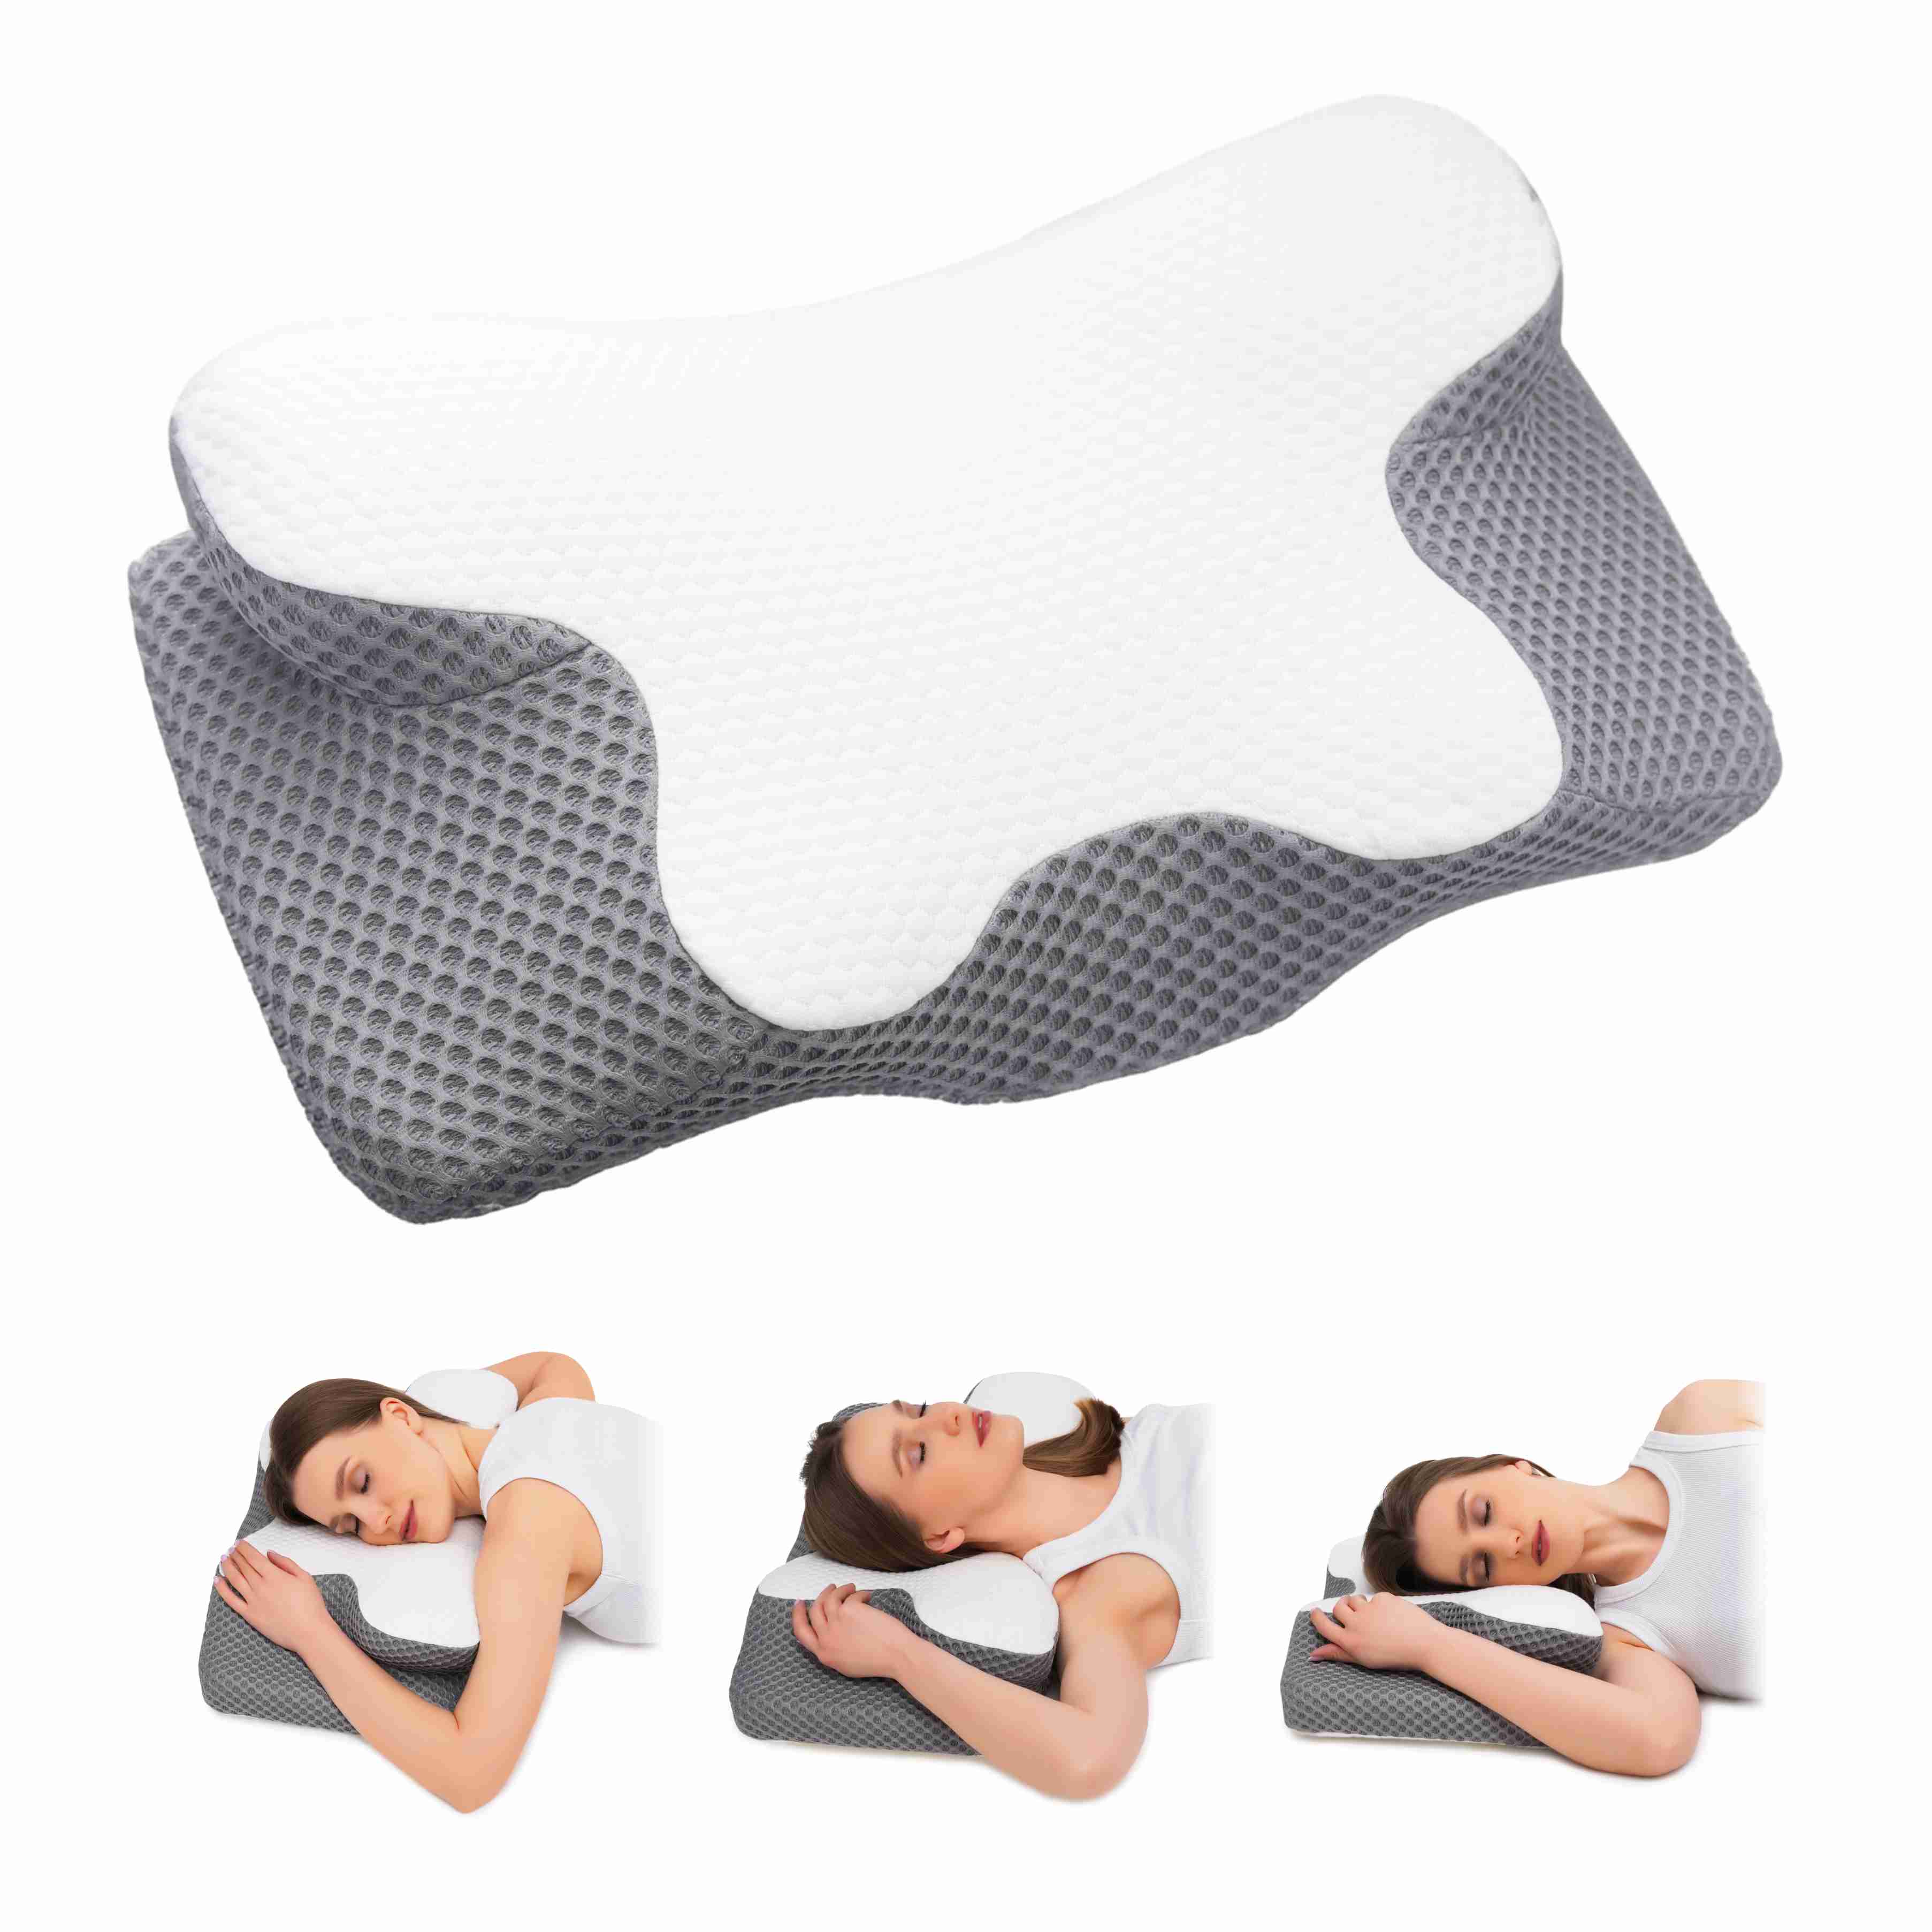 memory-foam-pillow-contour-pillows-for-neck-and-shoulder-pa with cash back rebate